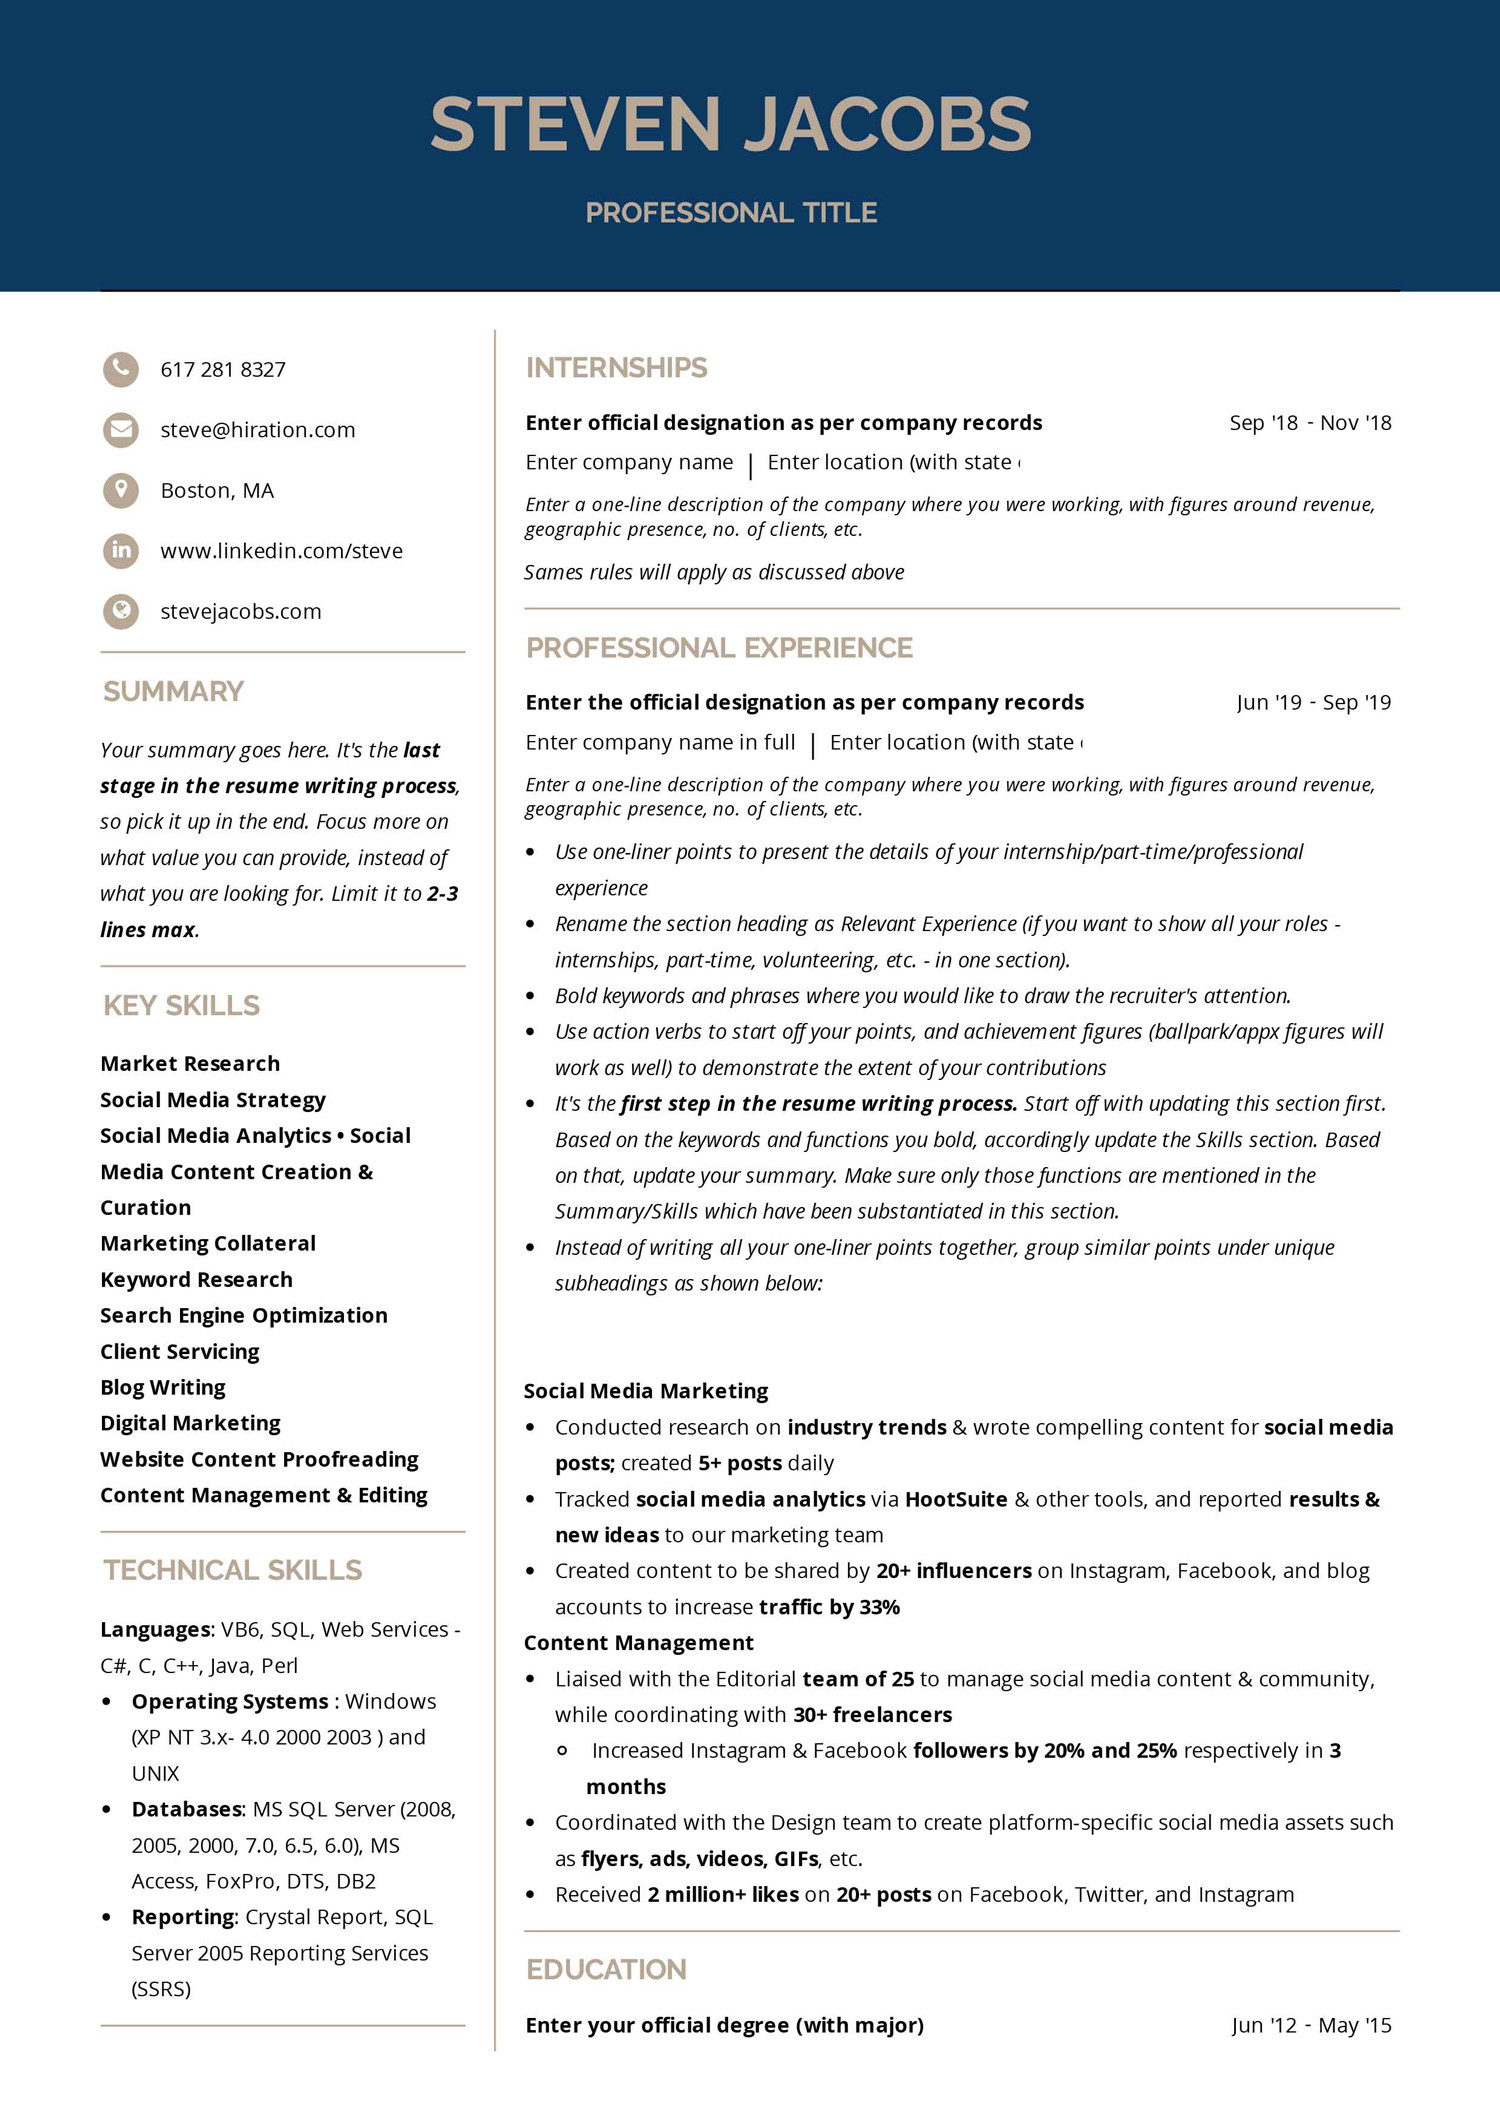 Resume Sample for Color Guard Instructor Best Free Resume Templates with Examples [2020]